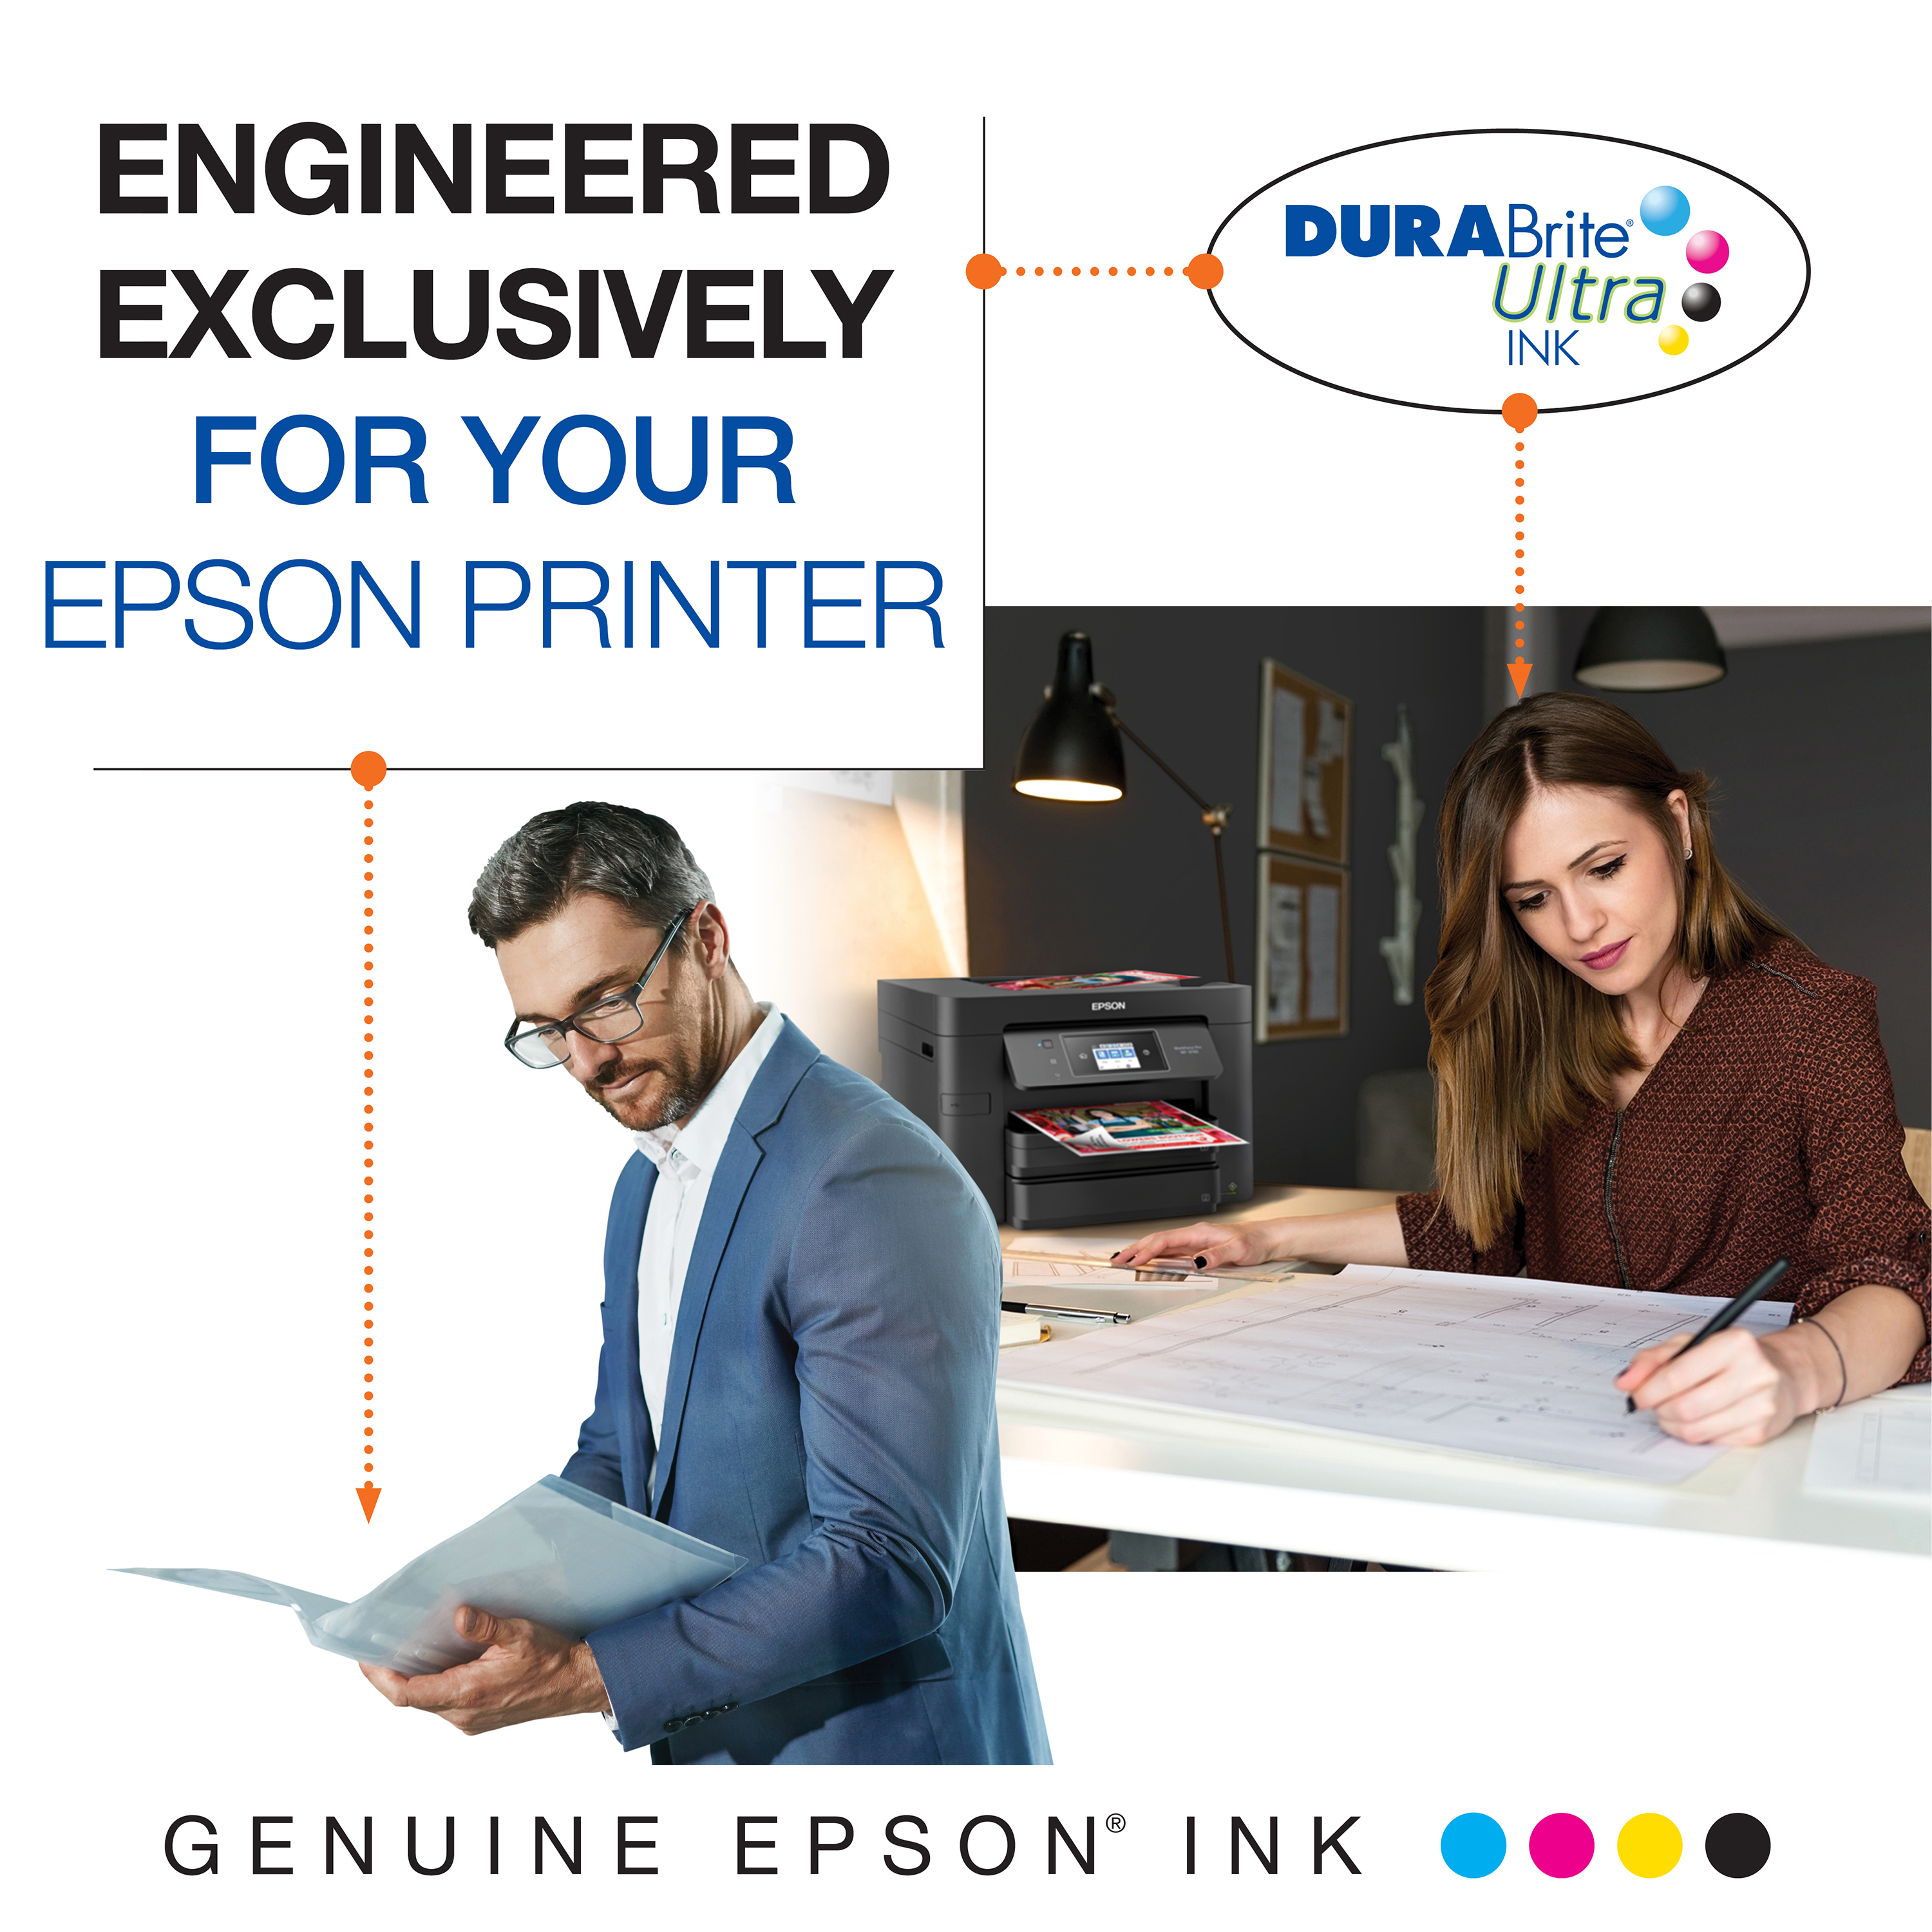 EPSON 288 DURABrite Ultra Ink High Capacity Black & Standard Color Cartridge Combo Pack (T288XL-BCS) Works with Expression XP-330, XP-430, XP-434, XP-340, XP-440, XP-446 - image 5 of 5